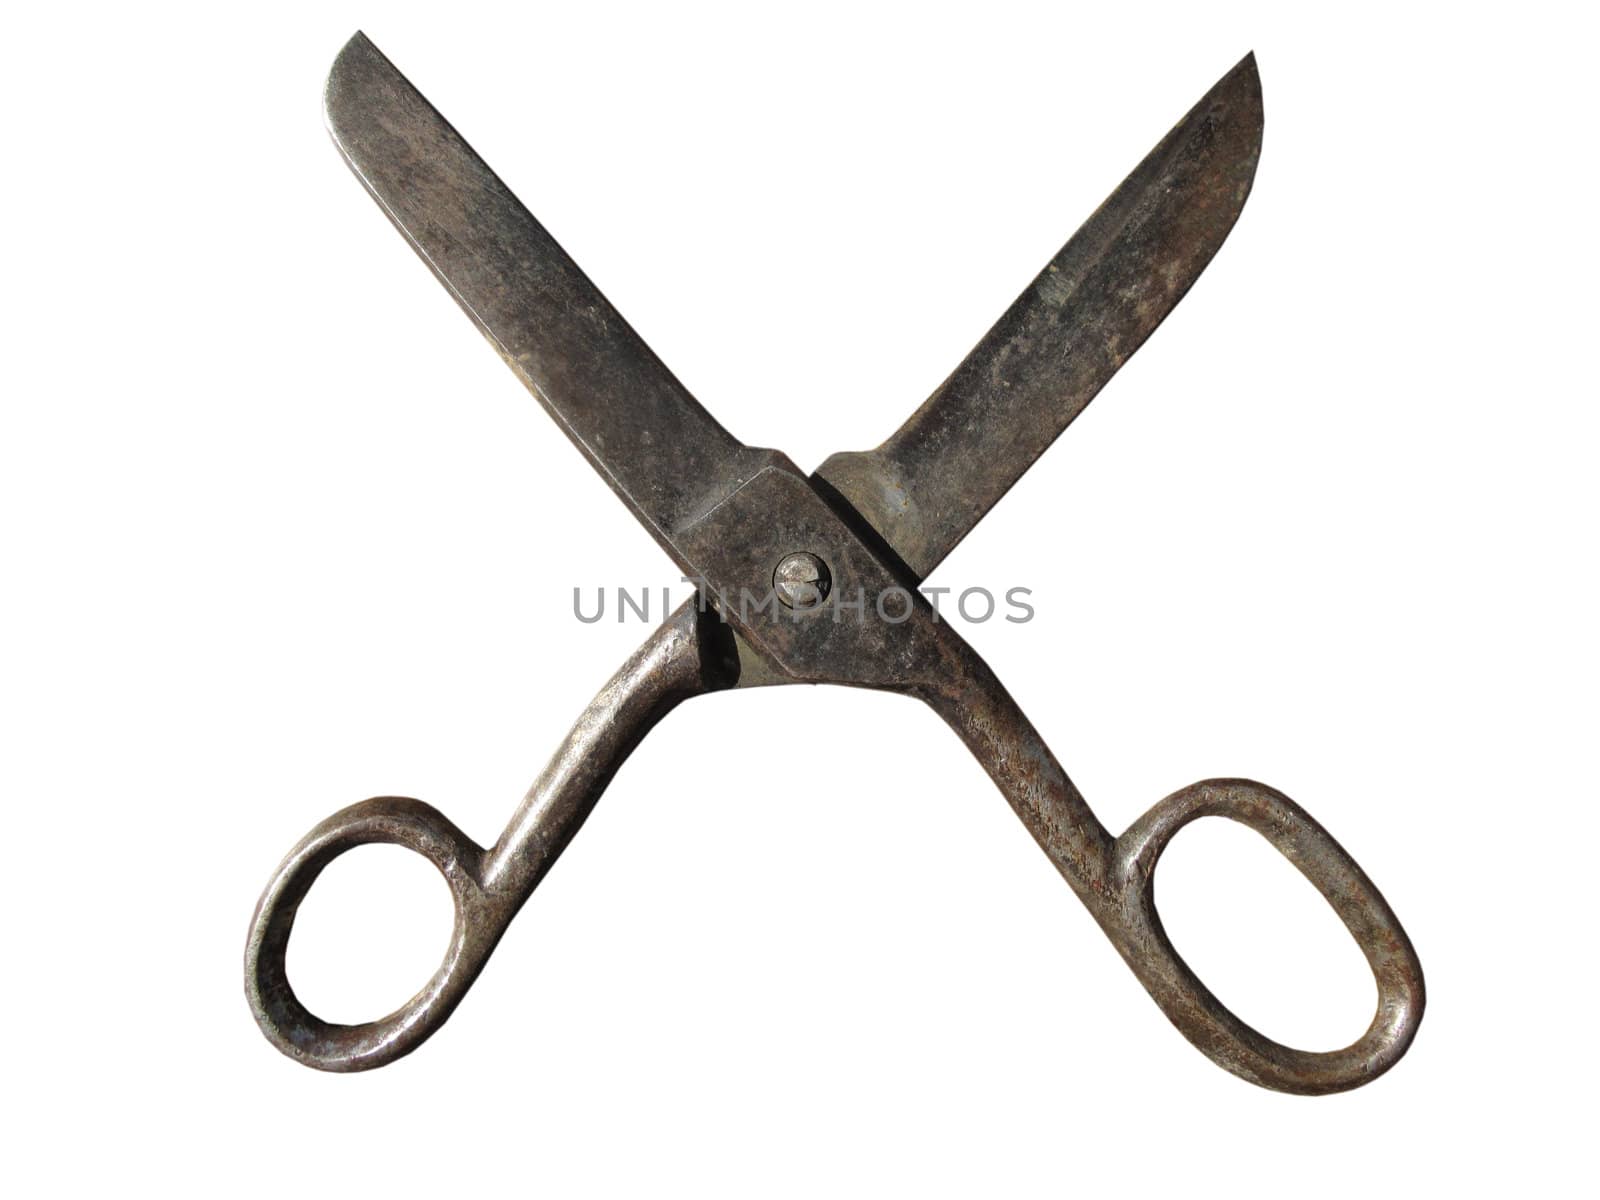 An open pair of old scissors ready to cut.
                            